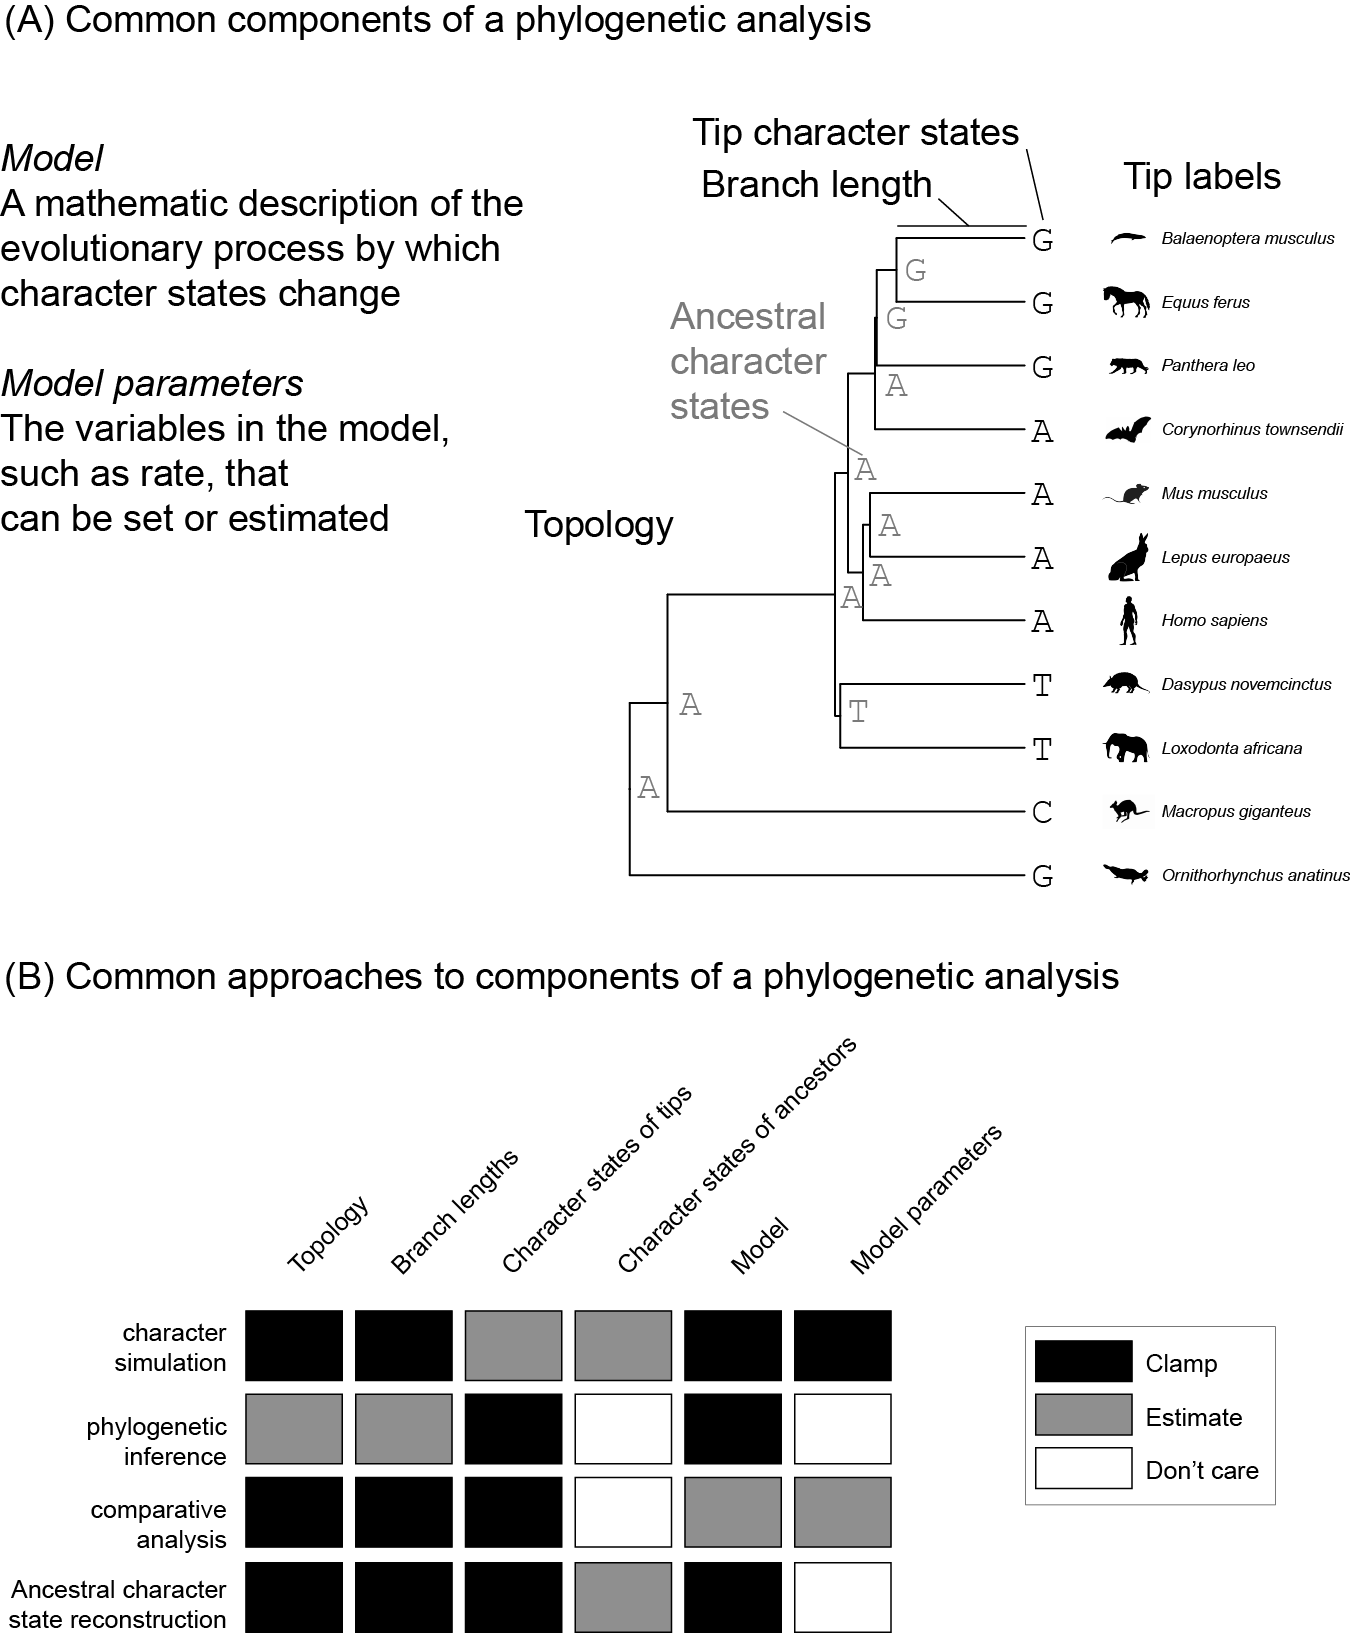 (A) The primary components of a phylogenetic analysis. This mammal phylogeny and branch lengths are from http://vertlife.org. The organism silhouettes are from http://phylopic.org/. (B) Different analyses tend to take different approaches to these components.